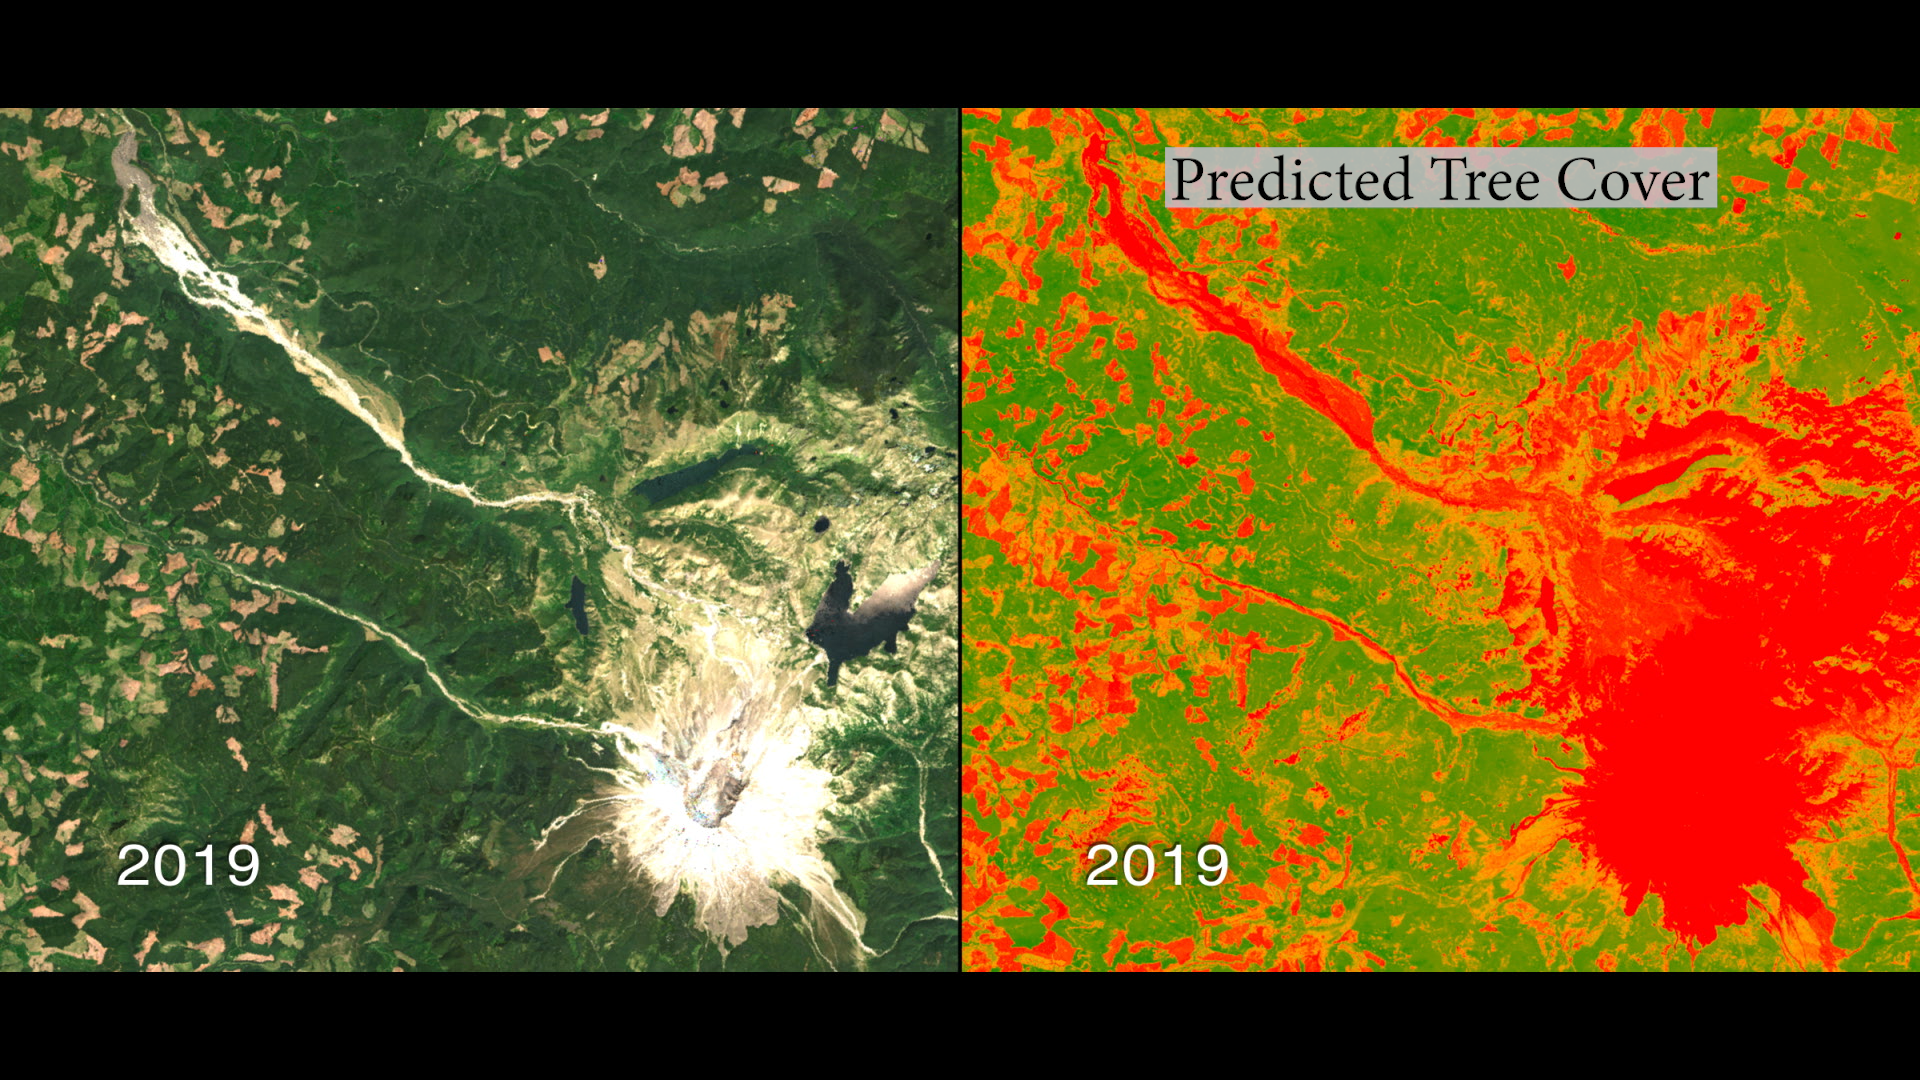 The long record of Landsat data (since 1972) is helping scientists Sean Healey and Zhiqiang Yang of the Rocky Mountain Research Station (U.S. Forest Service) study the long-term impact of the May 18, 1980, eruption of Mount St. Helens. With Landsat data for 8 years before the eruption, and 40 years since, they have calculated the percent tree cover for each year, watching as vegetation grows back.Music: The Waiting Room by Sam Dodson [PRS], published by Atmosphere Music Ltd [PRS]; Inner Strength by Brava [SGAE], Dsilence [SGAE], Input [SGAE] , Output [SGAE], published by El Murmullo Sarao [SGAE], Universal Sarao [SGAE], Some Assembly by Kyle Fredrickson [ASCAP] and Taylor Alexander Locke [BMI], published by Killer Tracks [BMI], Soundcast Music [SESAC], and Light From Dark by Adam Salkeld [PRS] and Neil Pollard [PRS], published by Atmosphere Music Ltd [PRS], all available from Universal Production Music.Complete transcript available.Watch this video on the NASA Goddard YouTube channel.